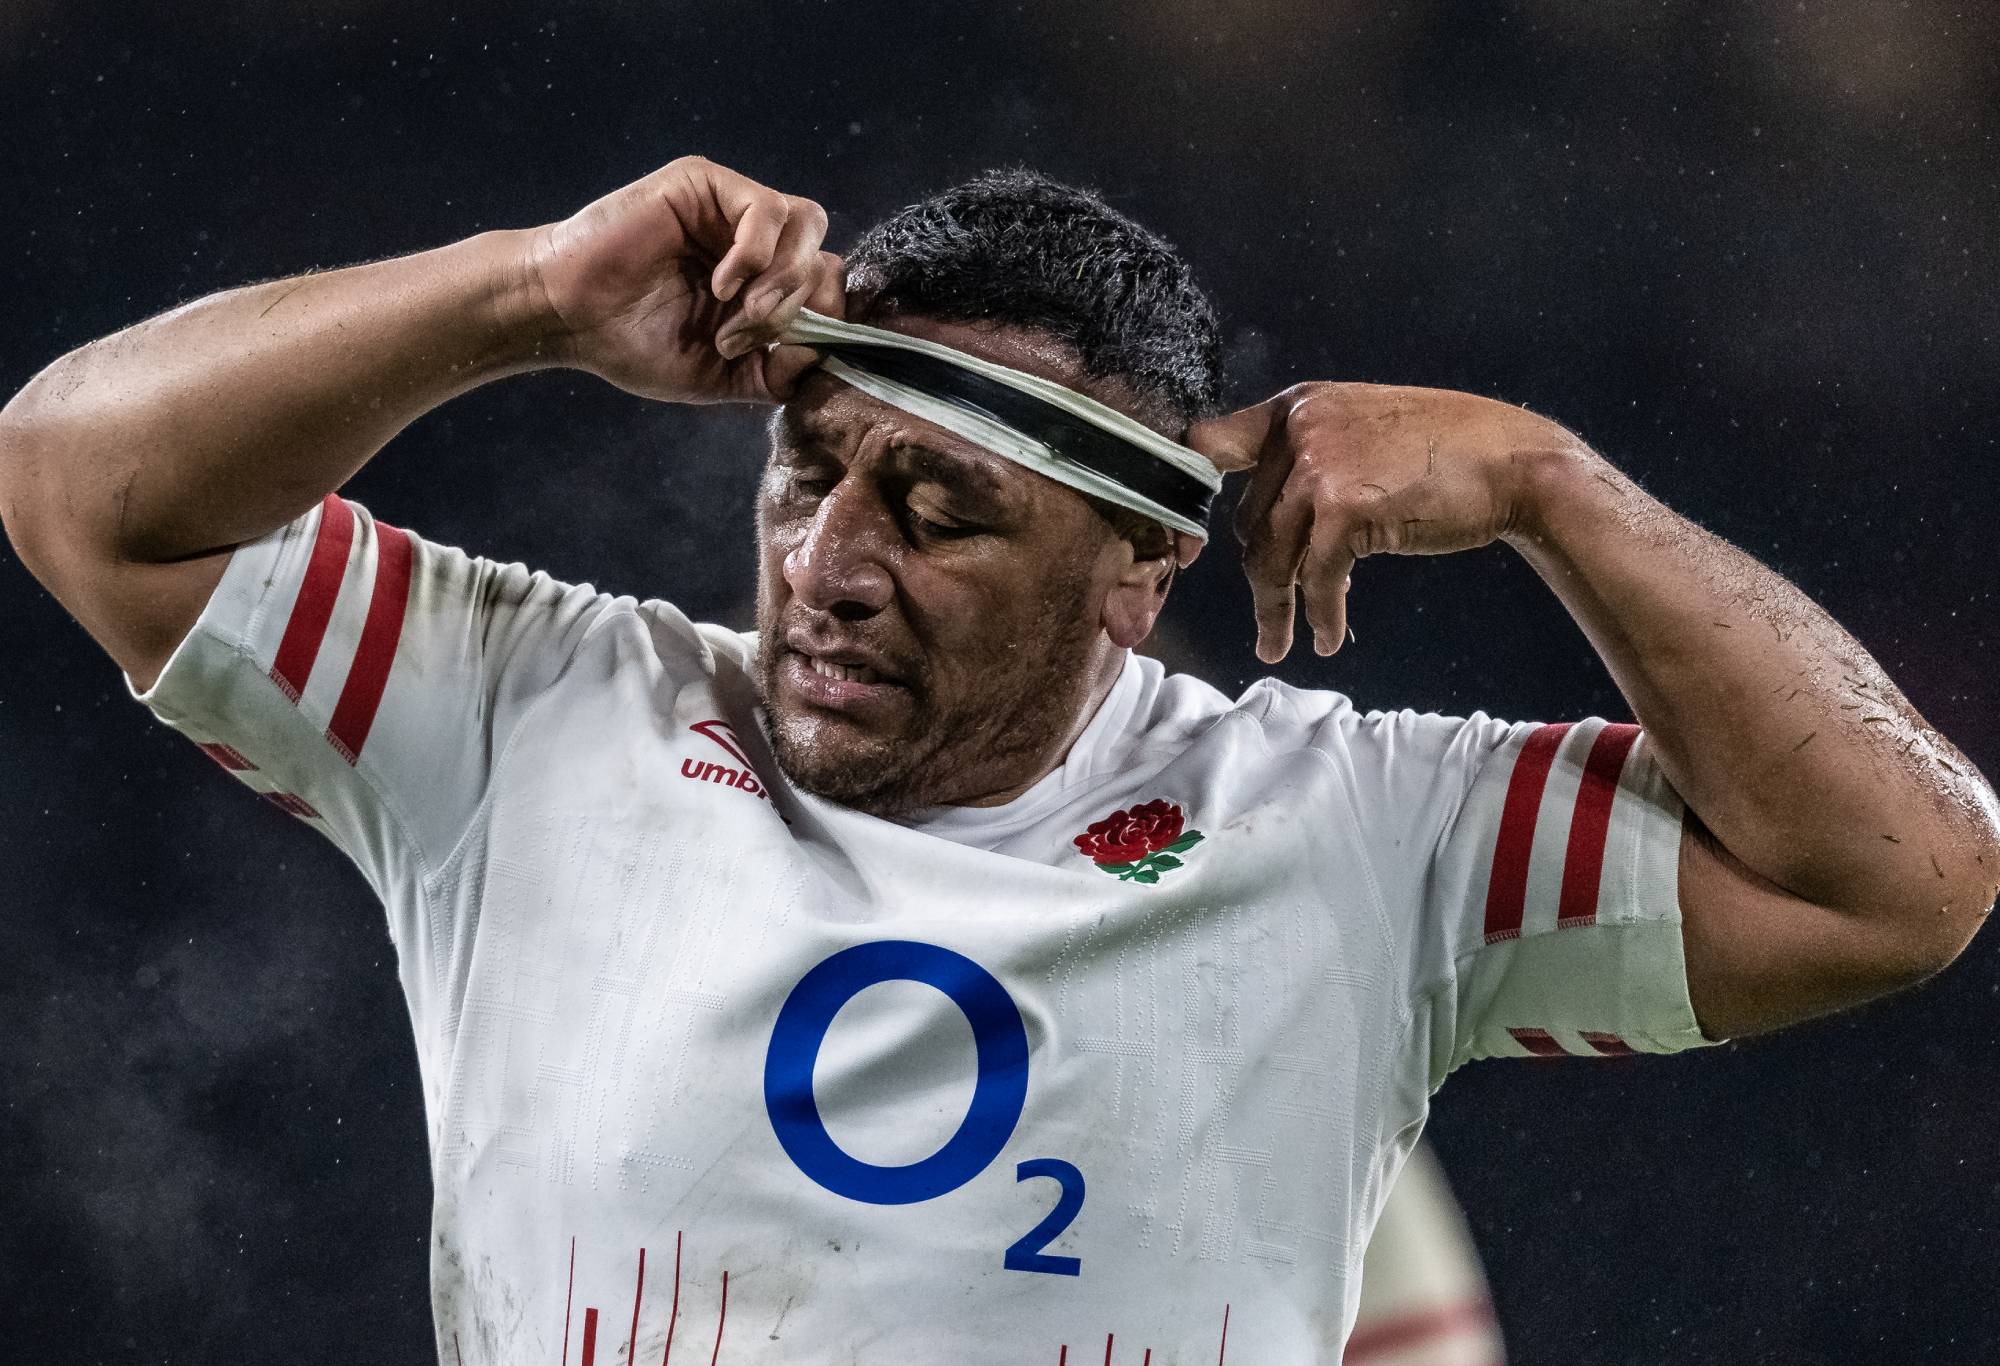 LONDON, ENGLAND - MARCH 11: Englands Mako Vunipola grimaces at the end of the match during the Six Nations Rugby match between England and France at Twickenham Stadium on March 11, 2023 in London, England. (Photo by Andrew Kearns - CameraSport via Getty Images)